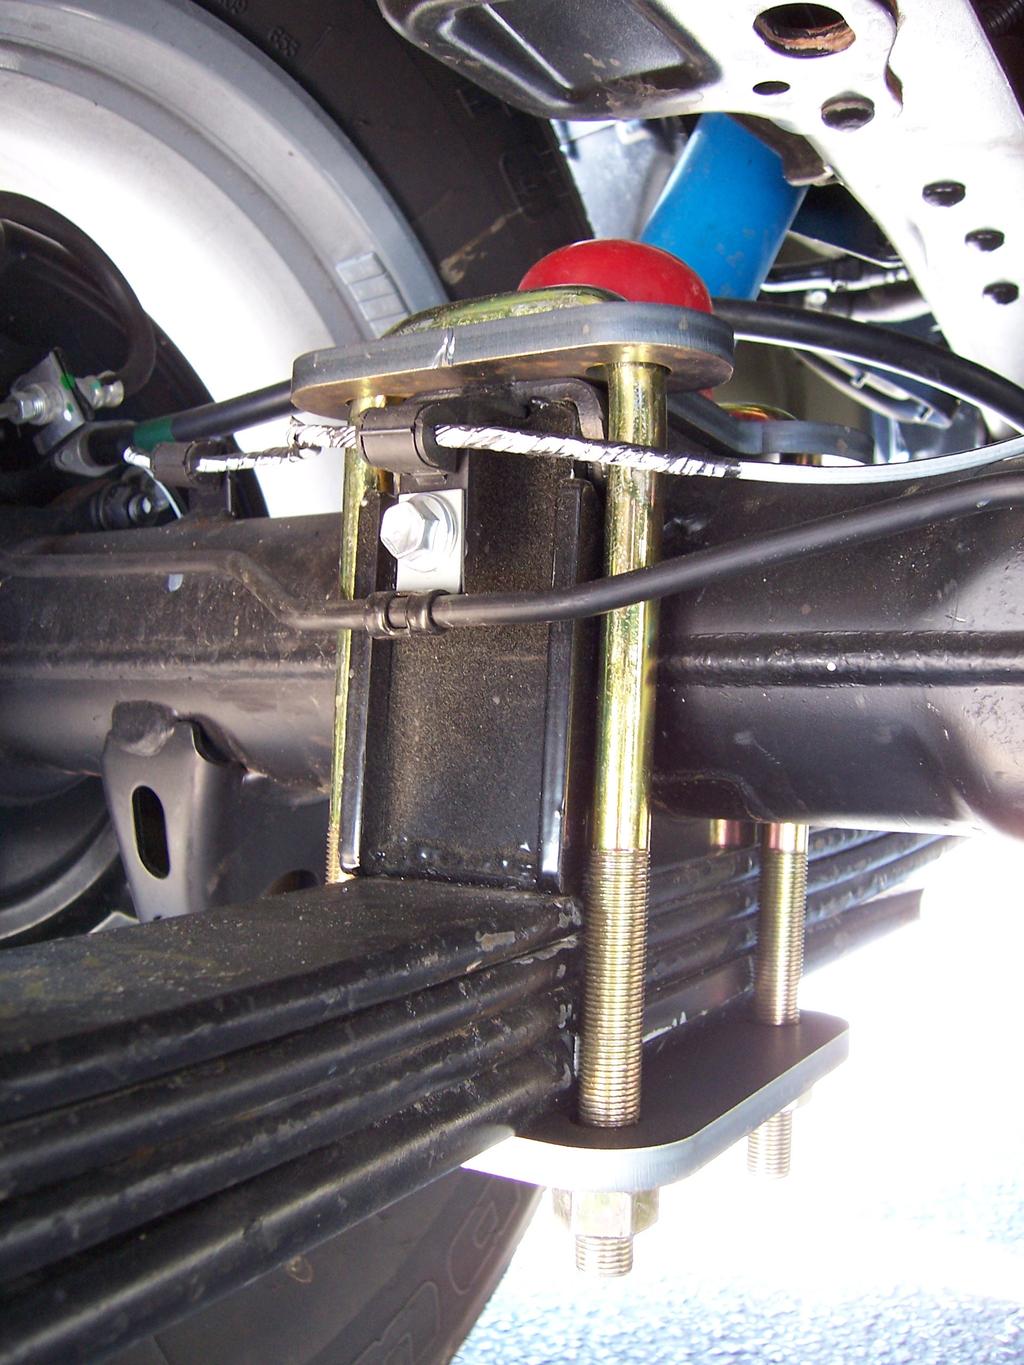 Page 6 Installation of Front lowering kit Step 10: Install the SOS axle components as shown in photo below.